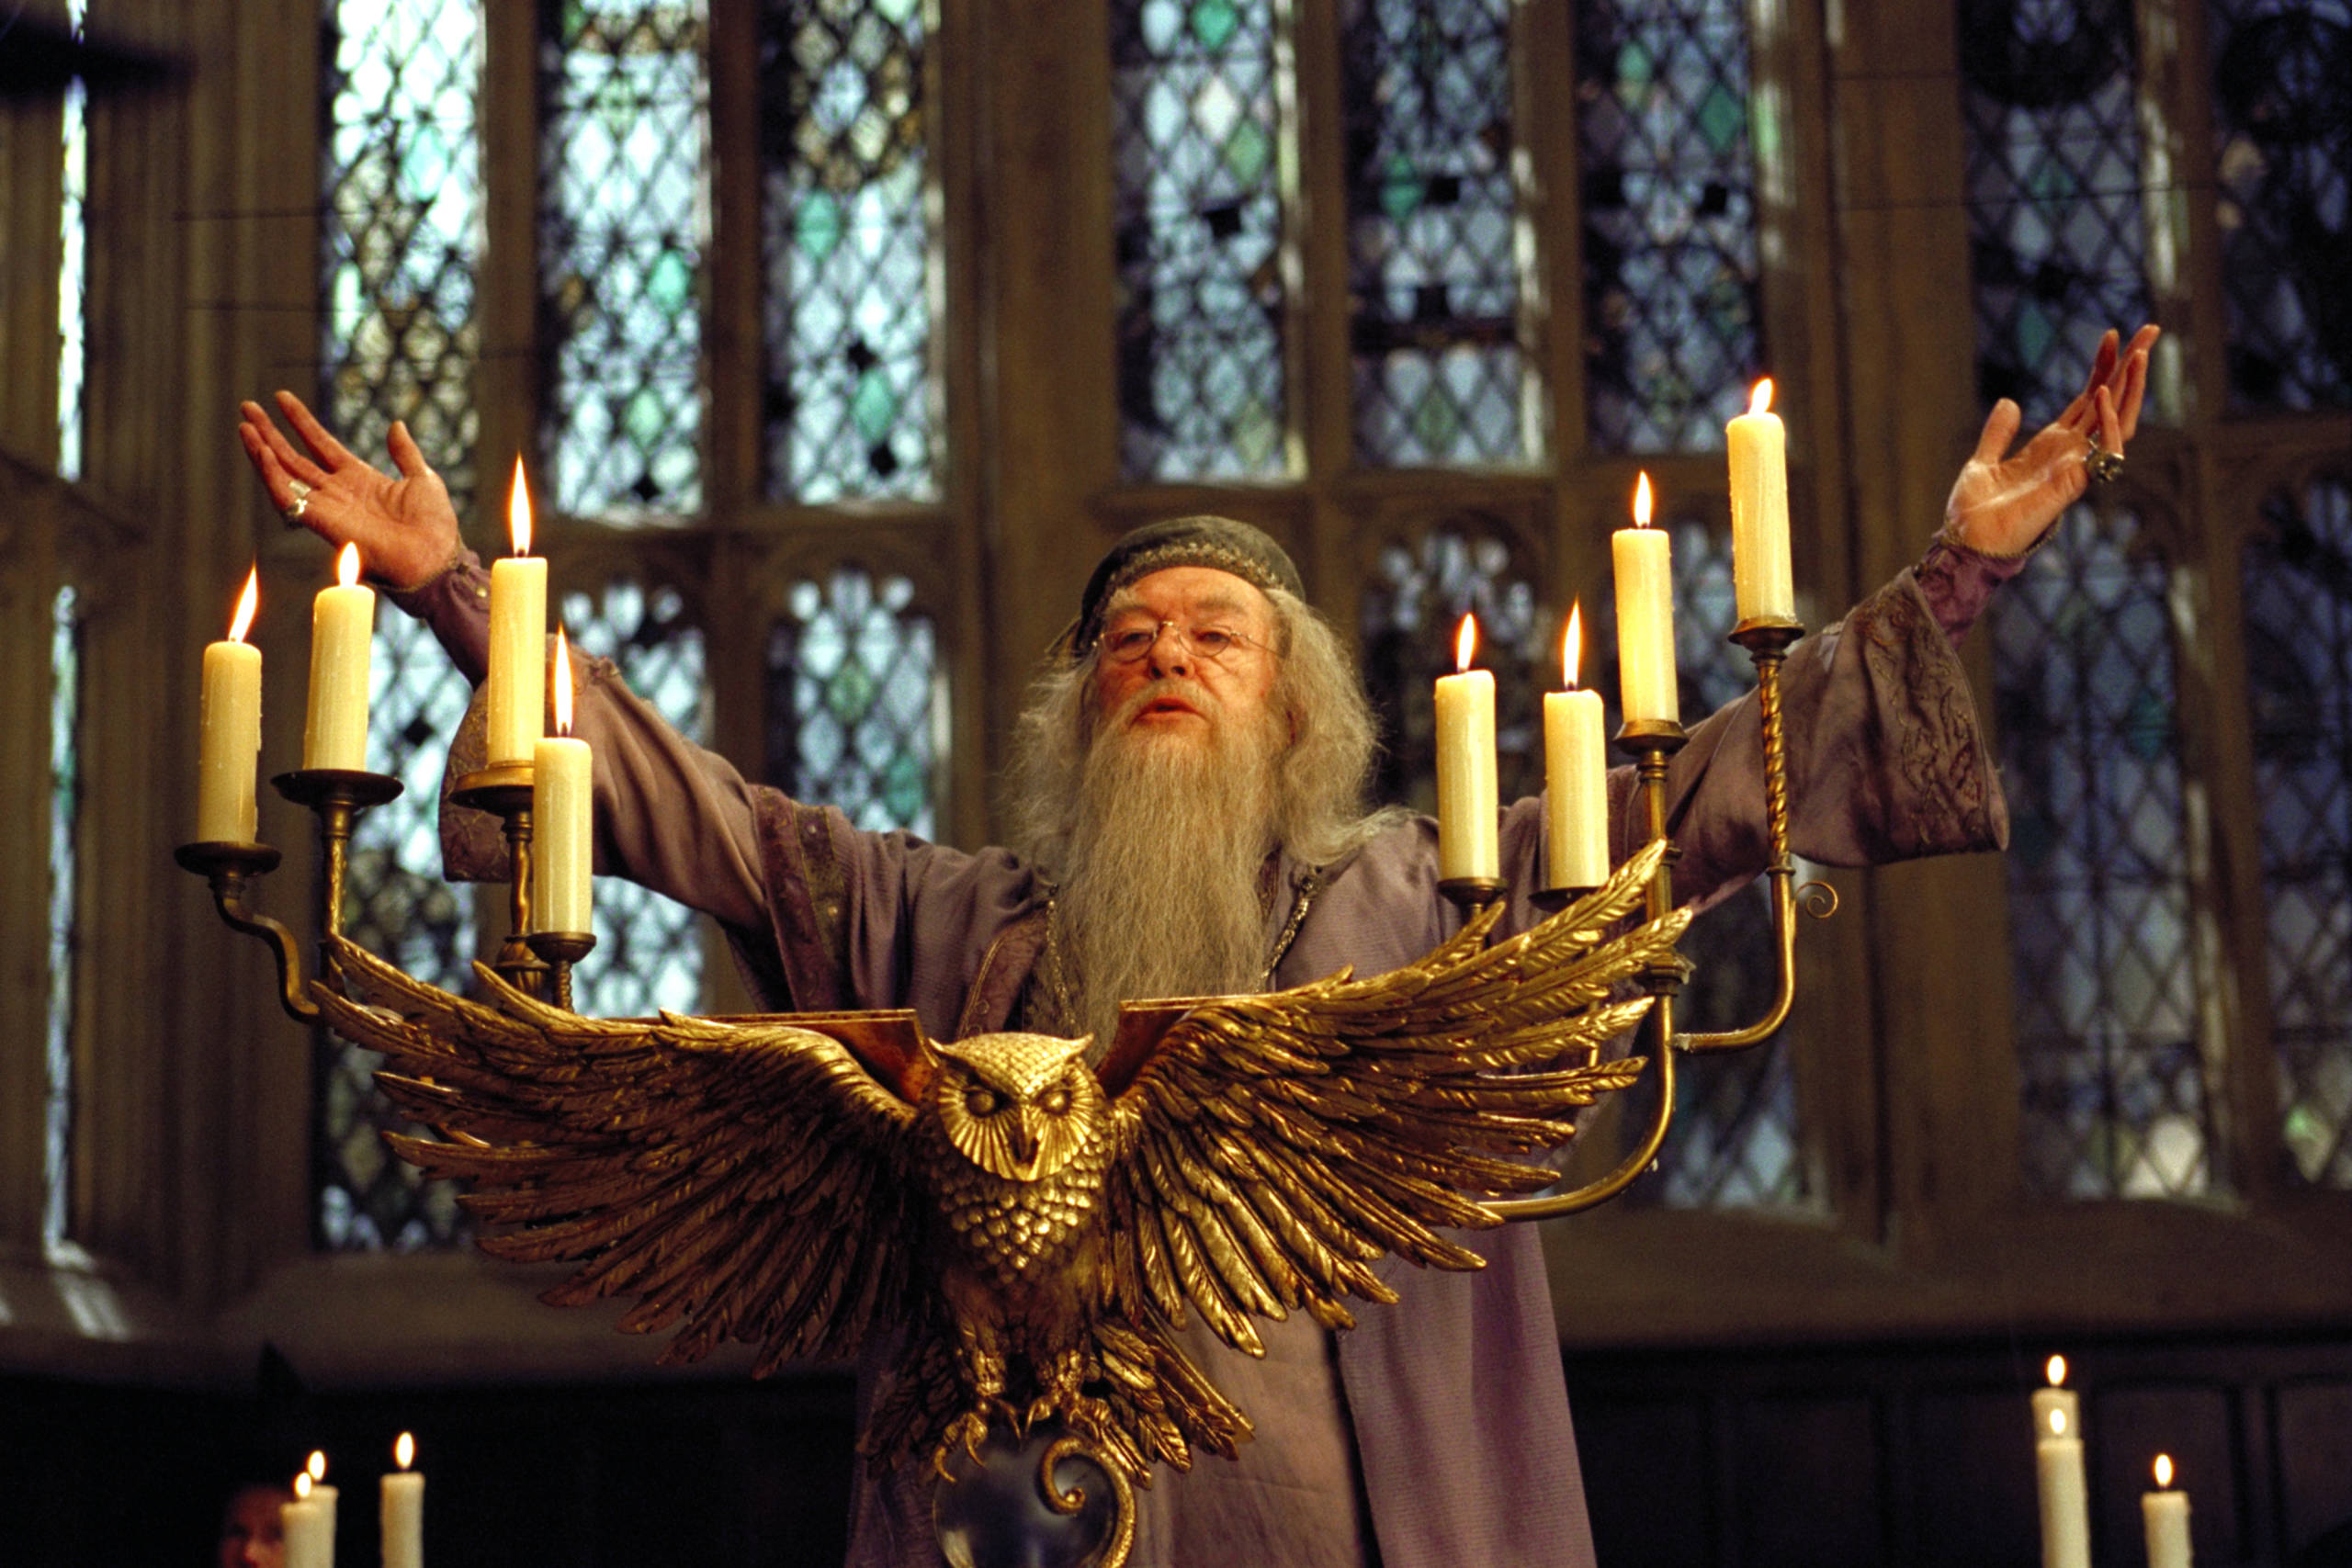 Dumbledore addressing students in the Great Hall from th